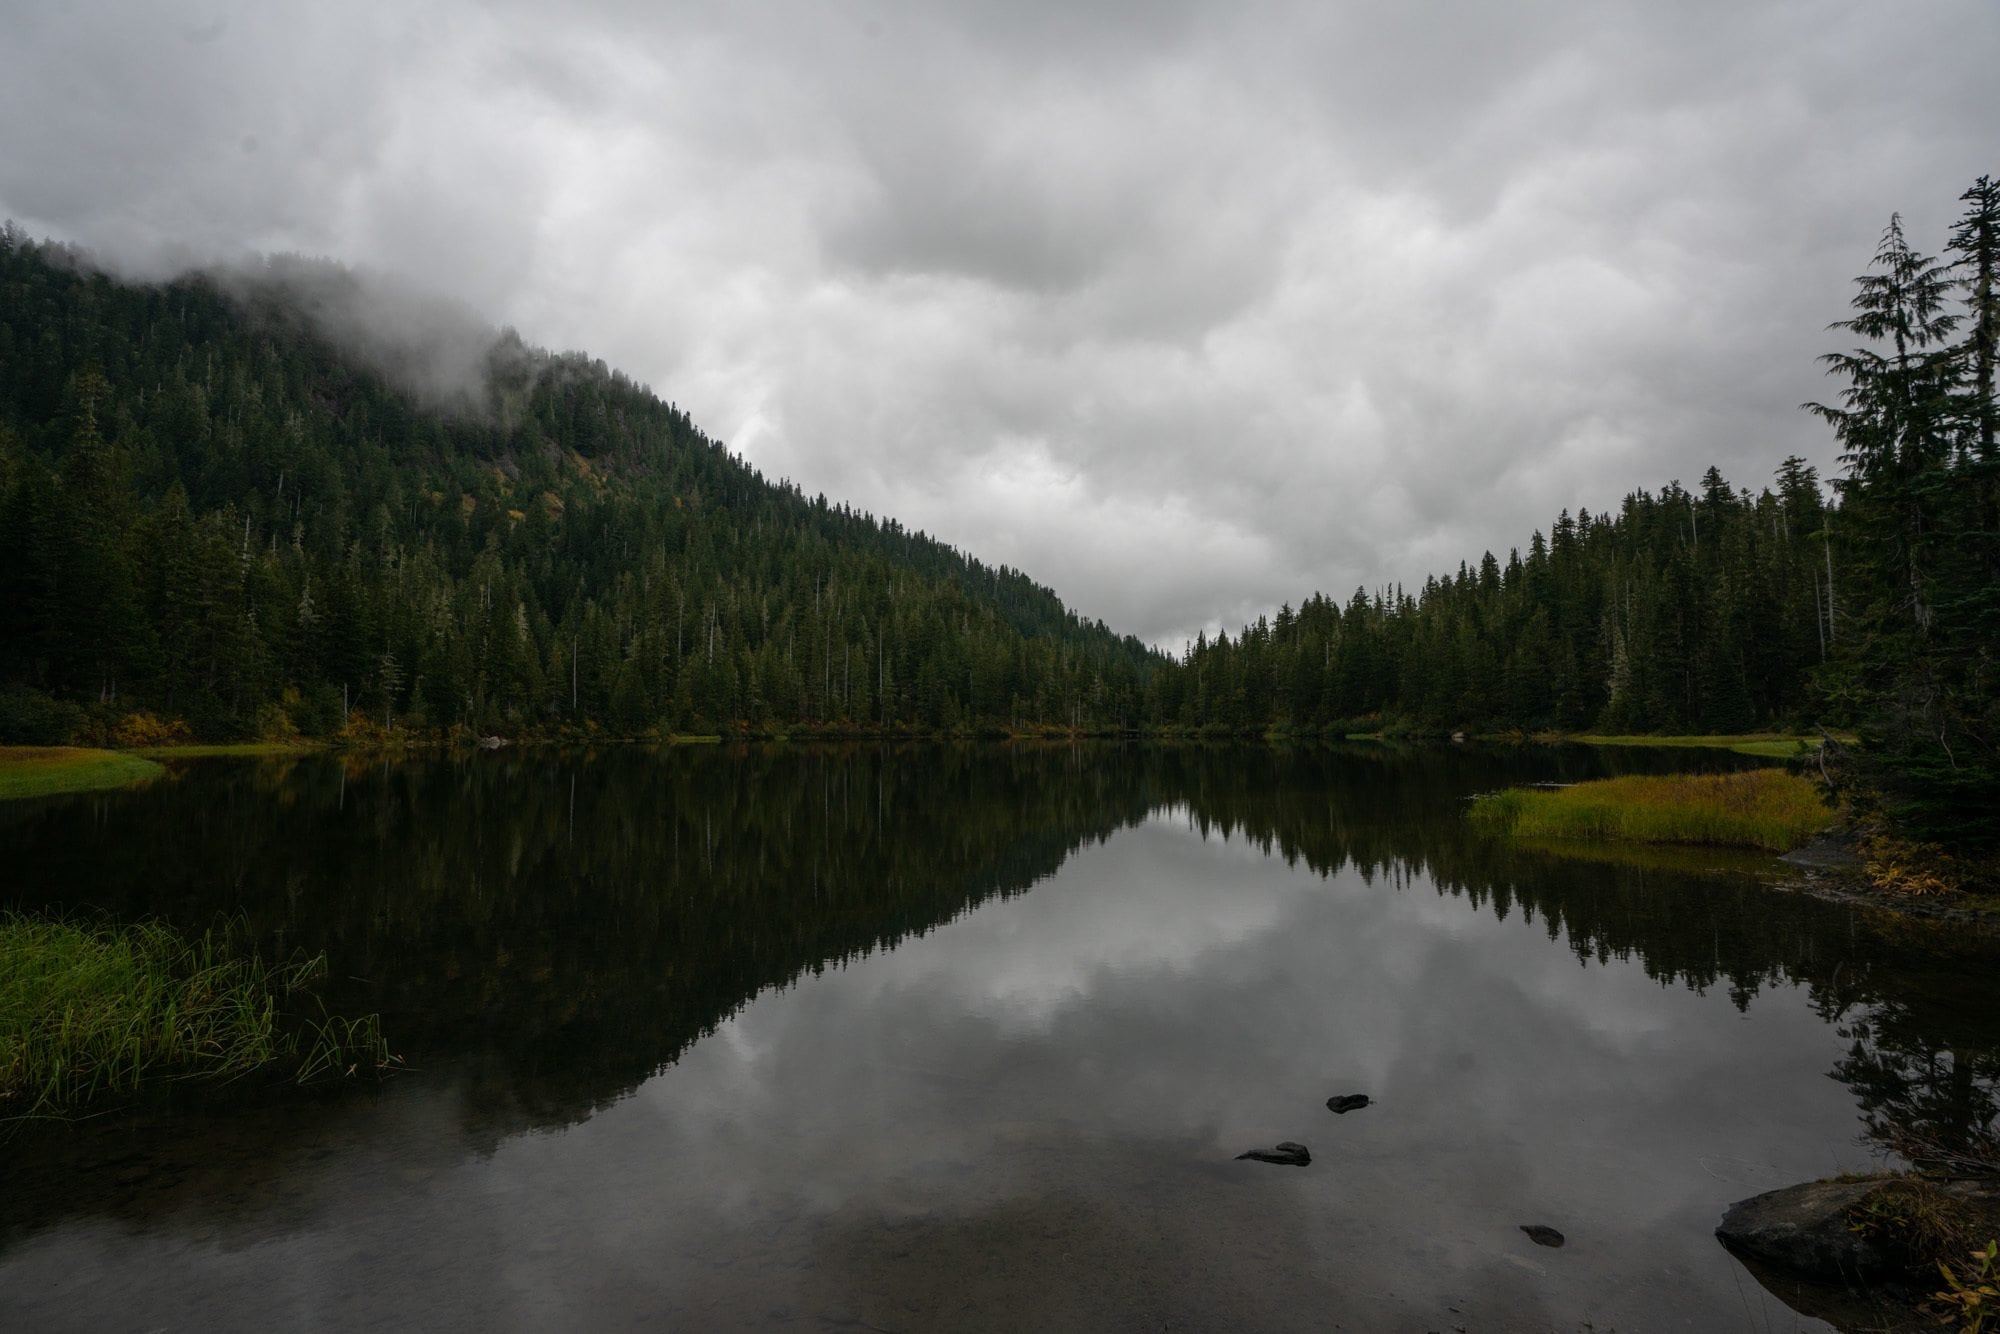 Photo out over lake surrounded by fir trees with clouds overhead